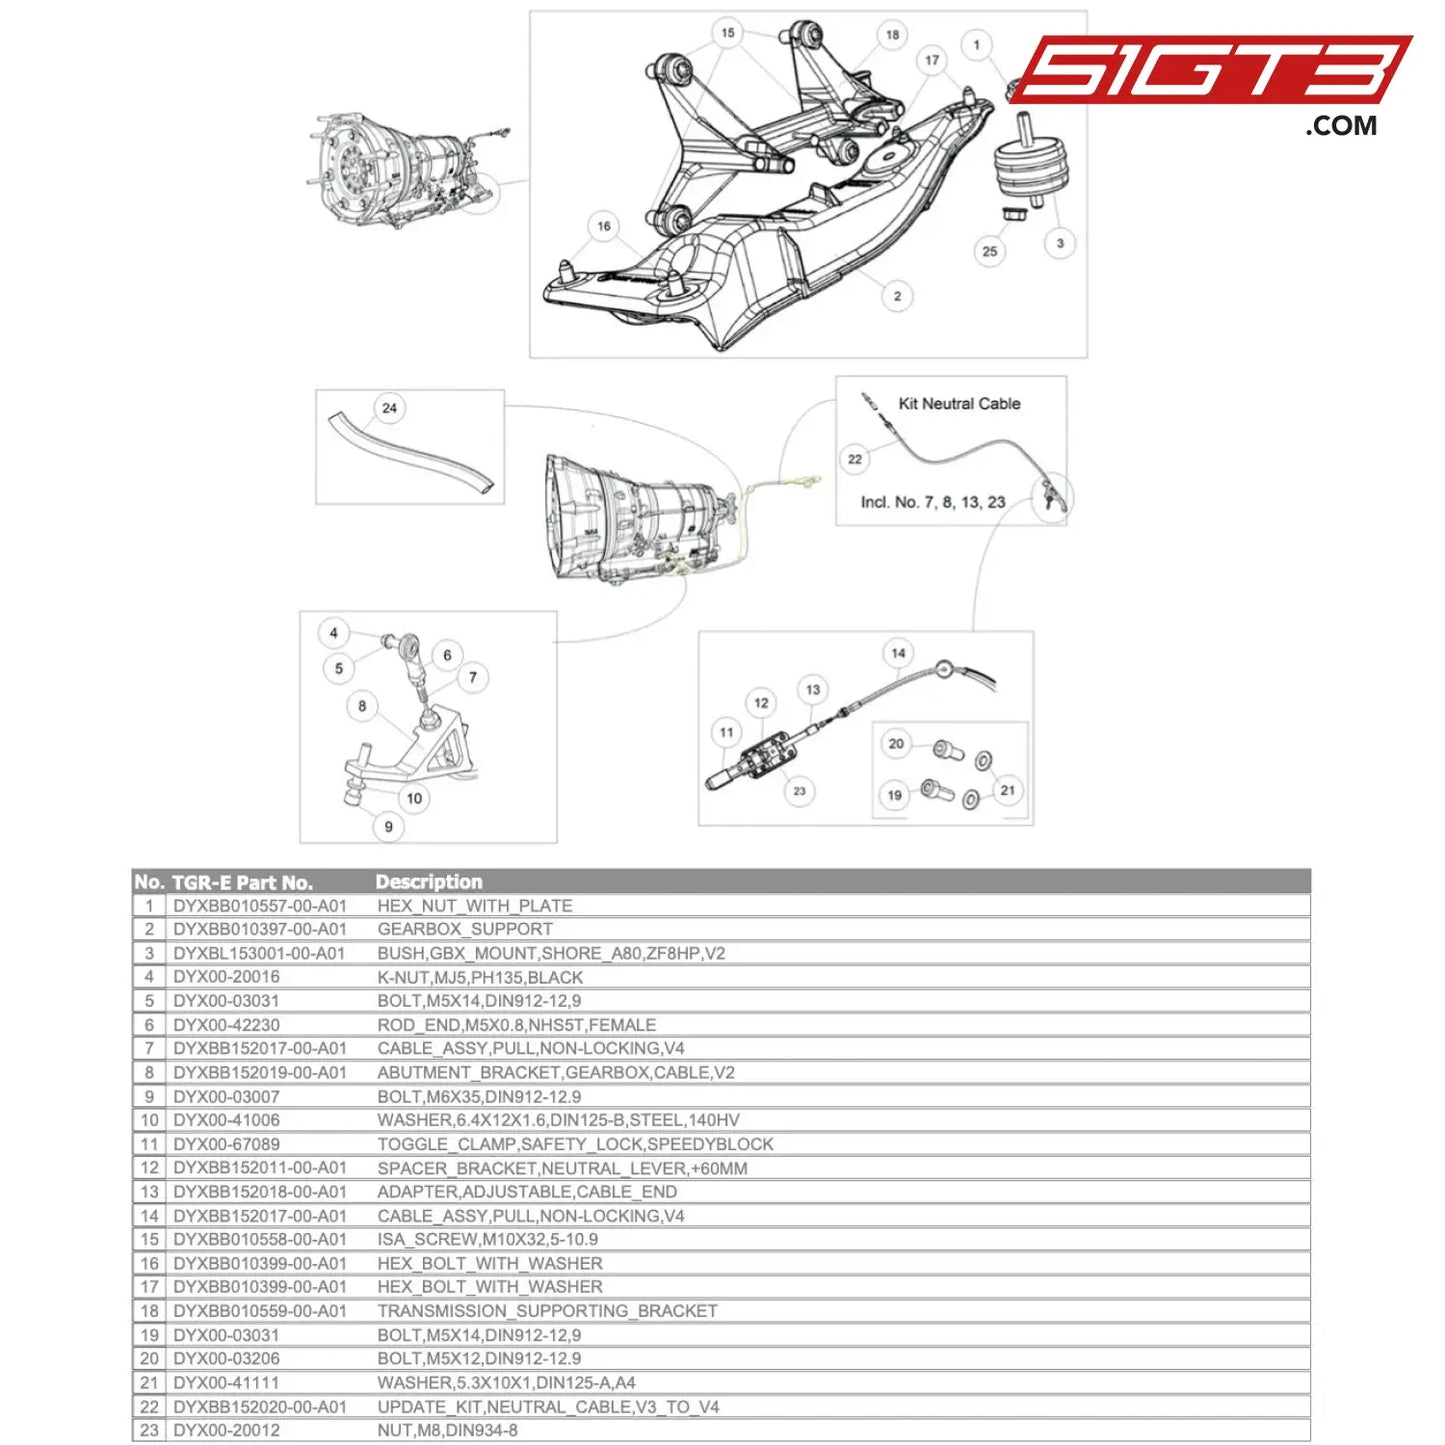 Update_Kit Neutral_Cable V3_To_V4 - Dyxbb152020-00-A01 [Gr Supra Gt4 Evo] Gearbox Mount + Neutral